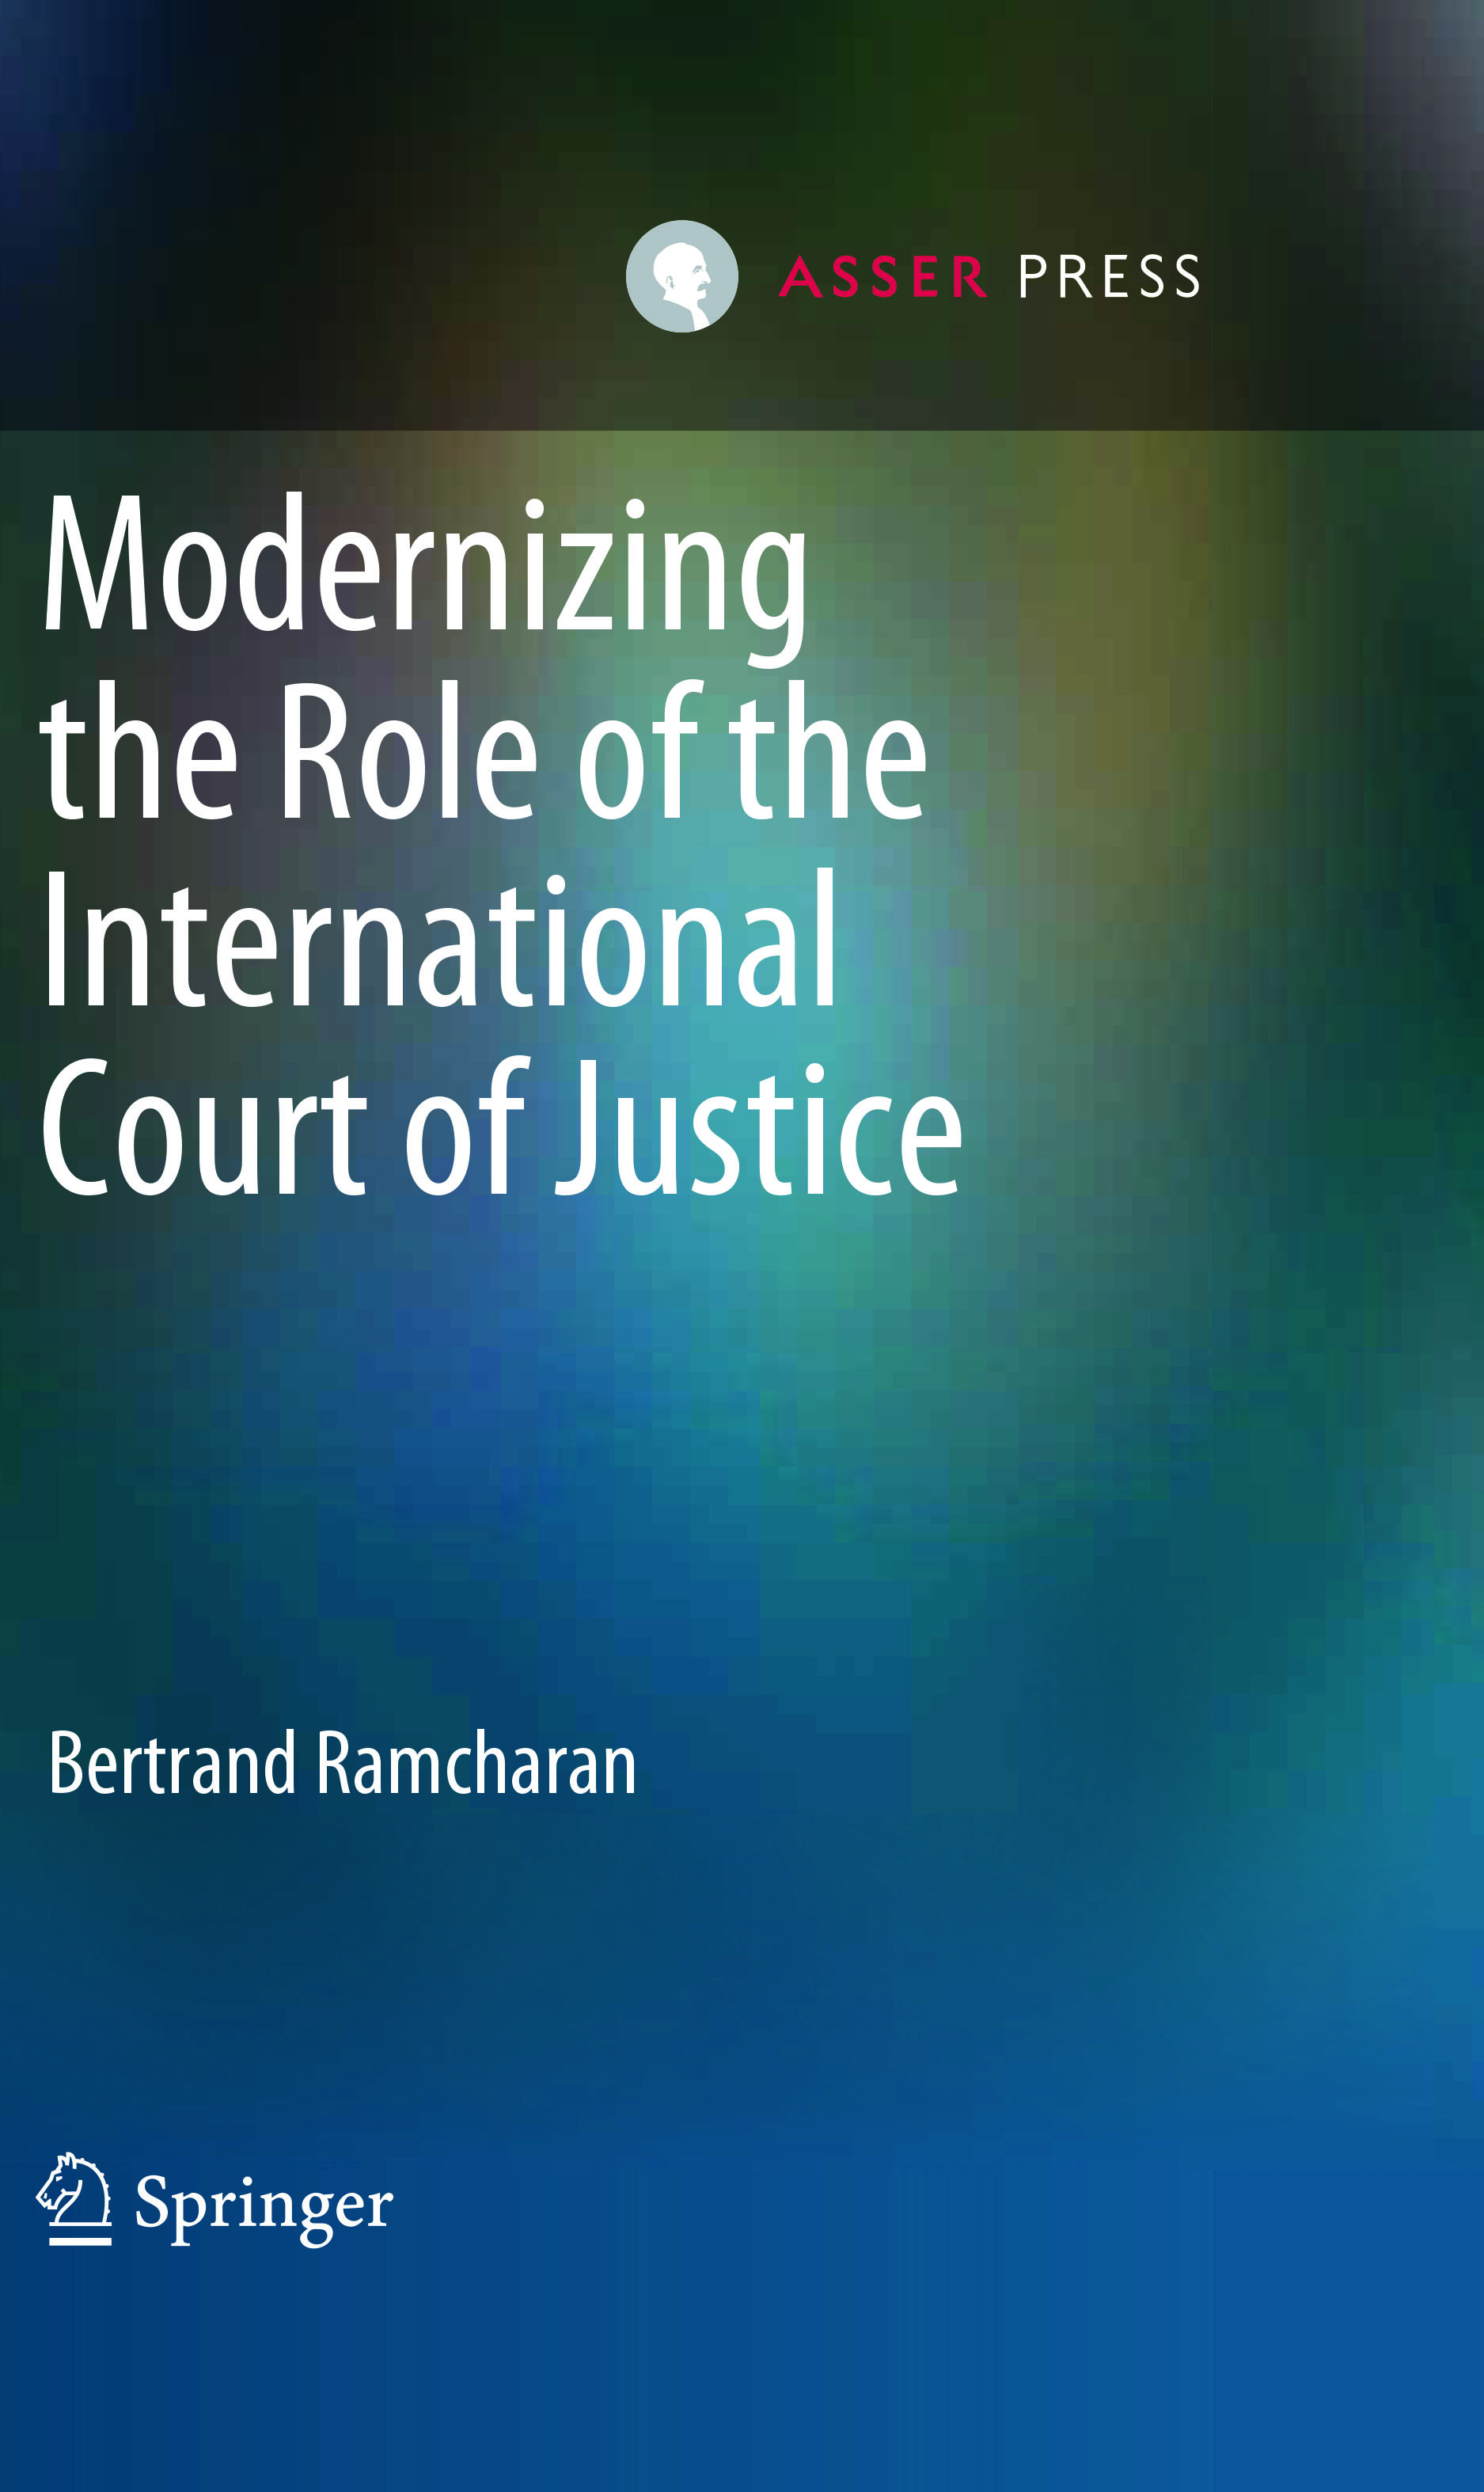 Modernizing the Role of the International Court of Justice